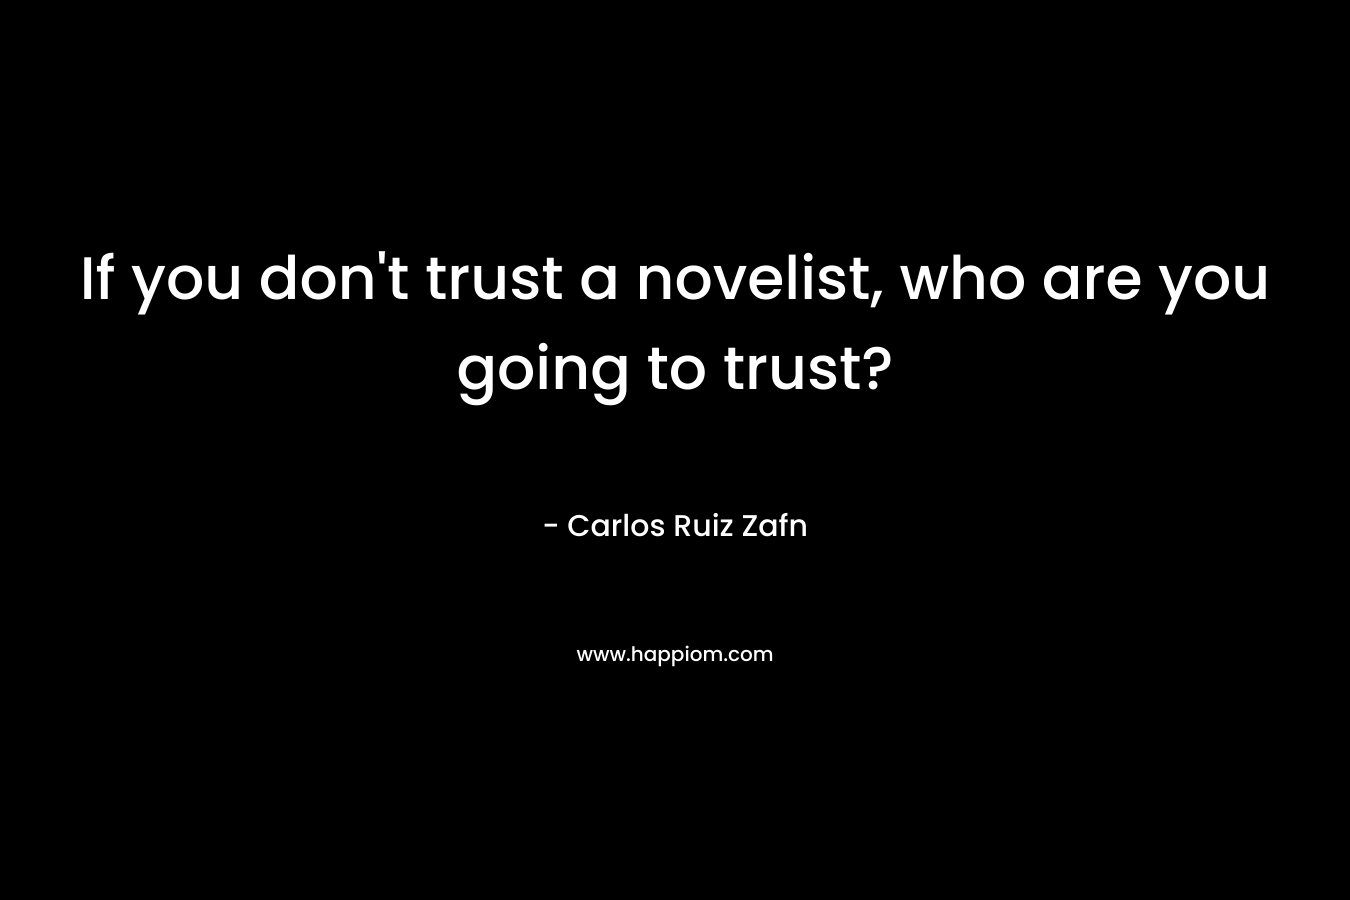 If you don't trust a novelist, who are you going to trust?